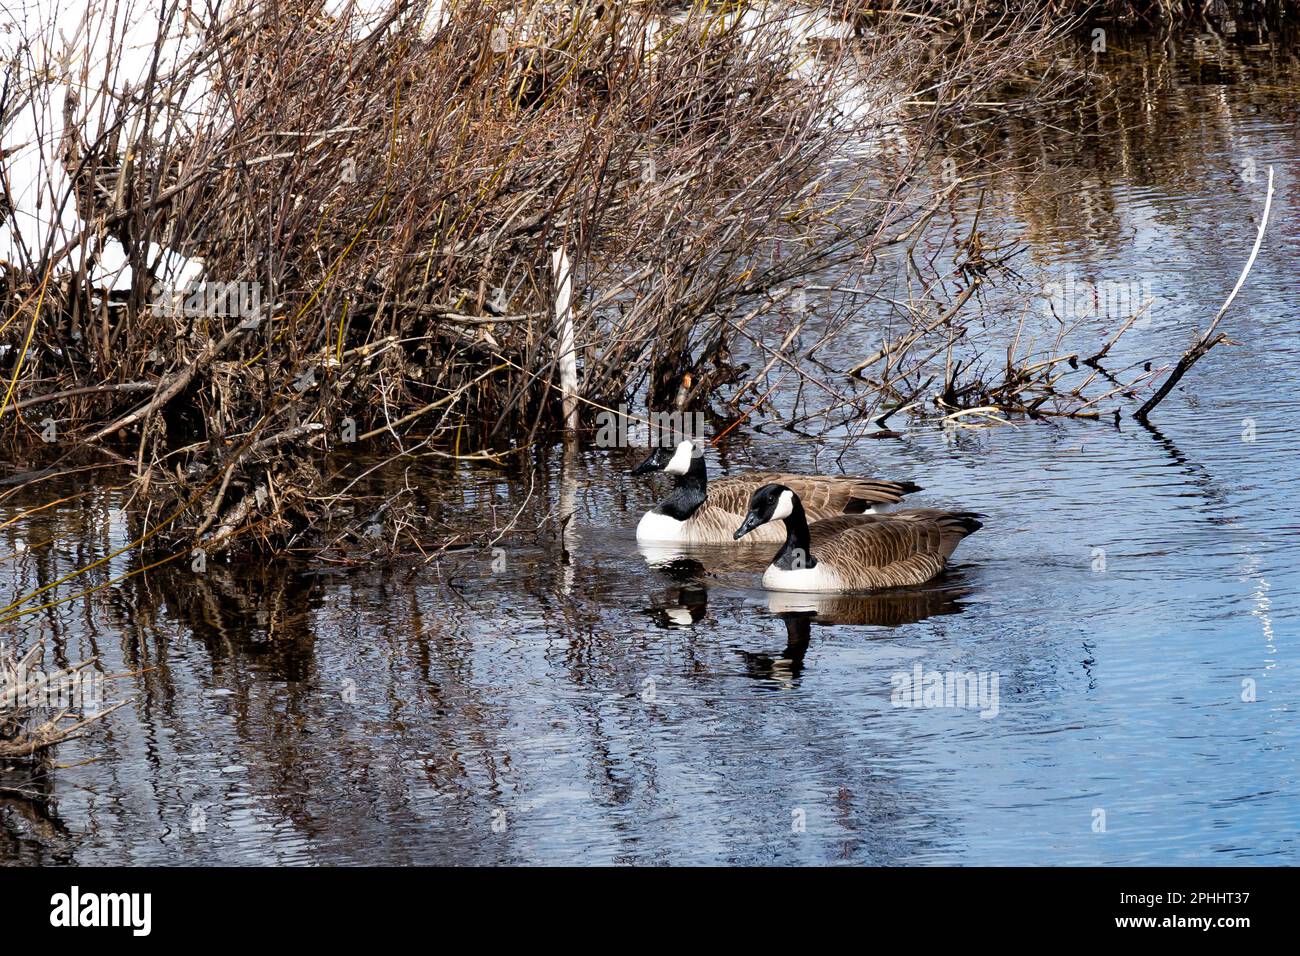 A pair of Canada Geese, Branta canadensis, in late winter on the edge of the Sacandaga River in Speculator, NY, USA  looking for a spot to nest. Stock Photo